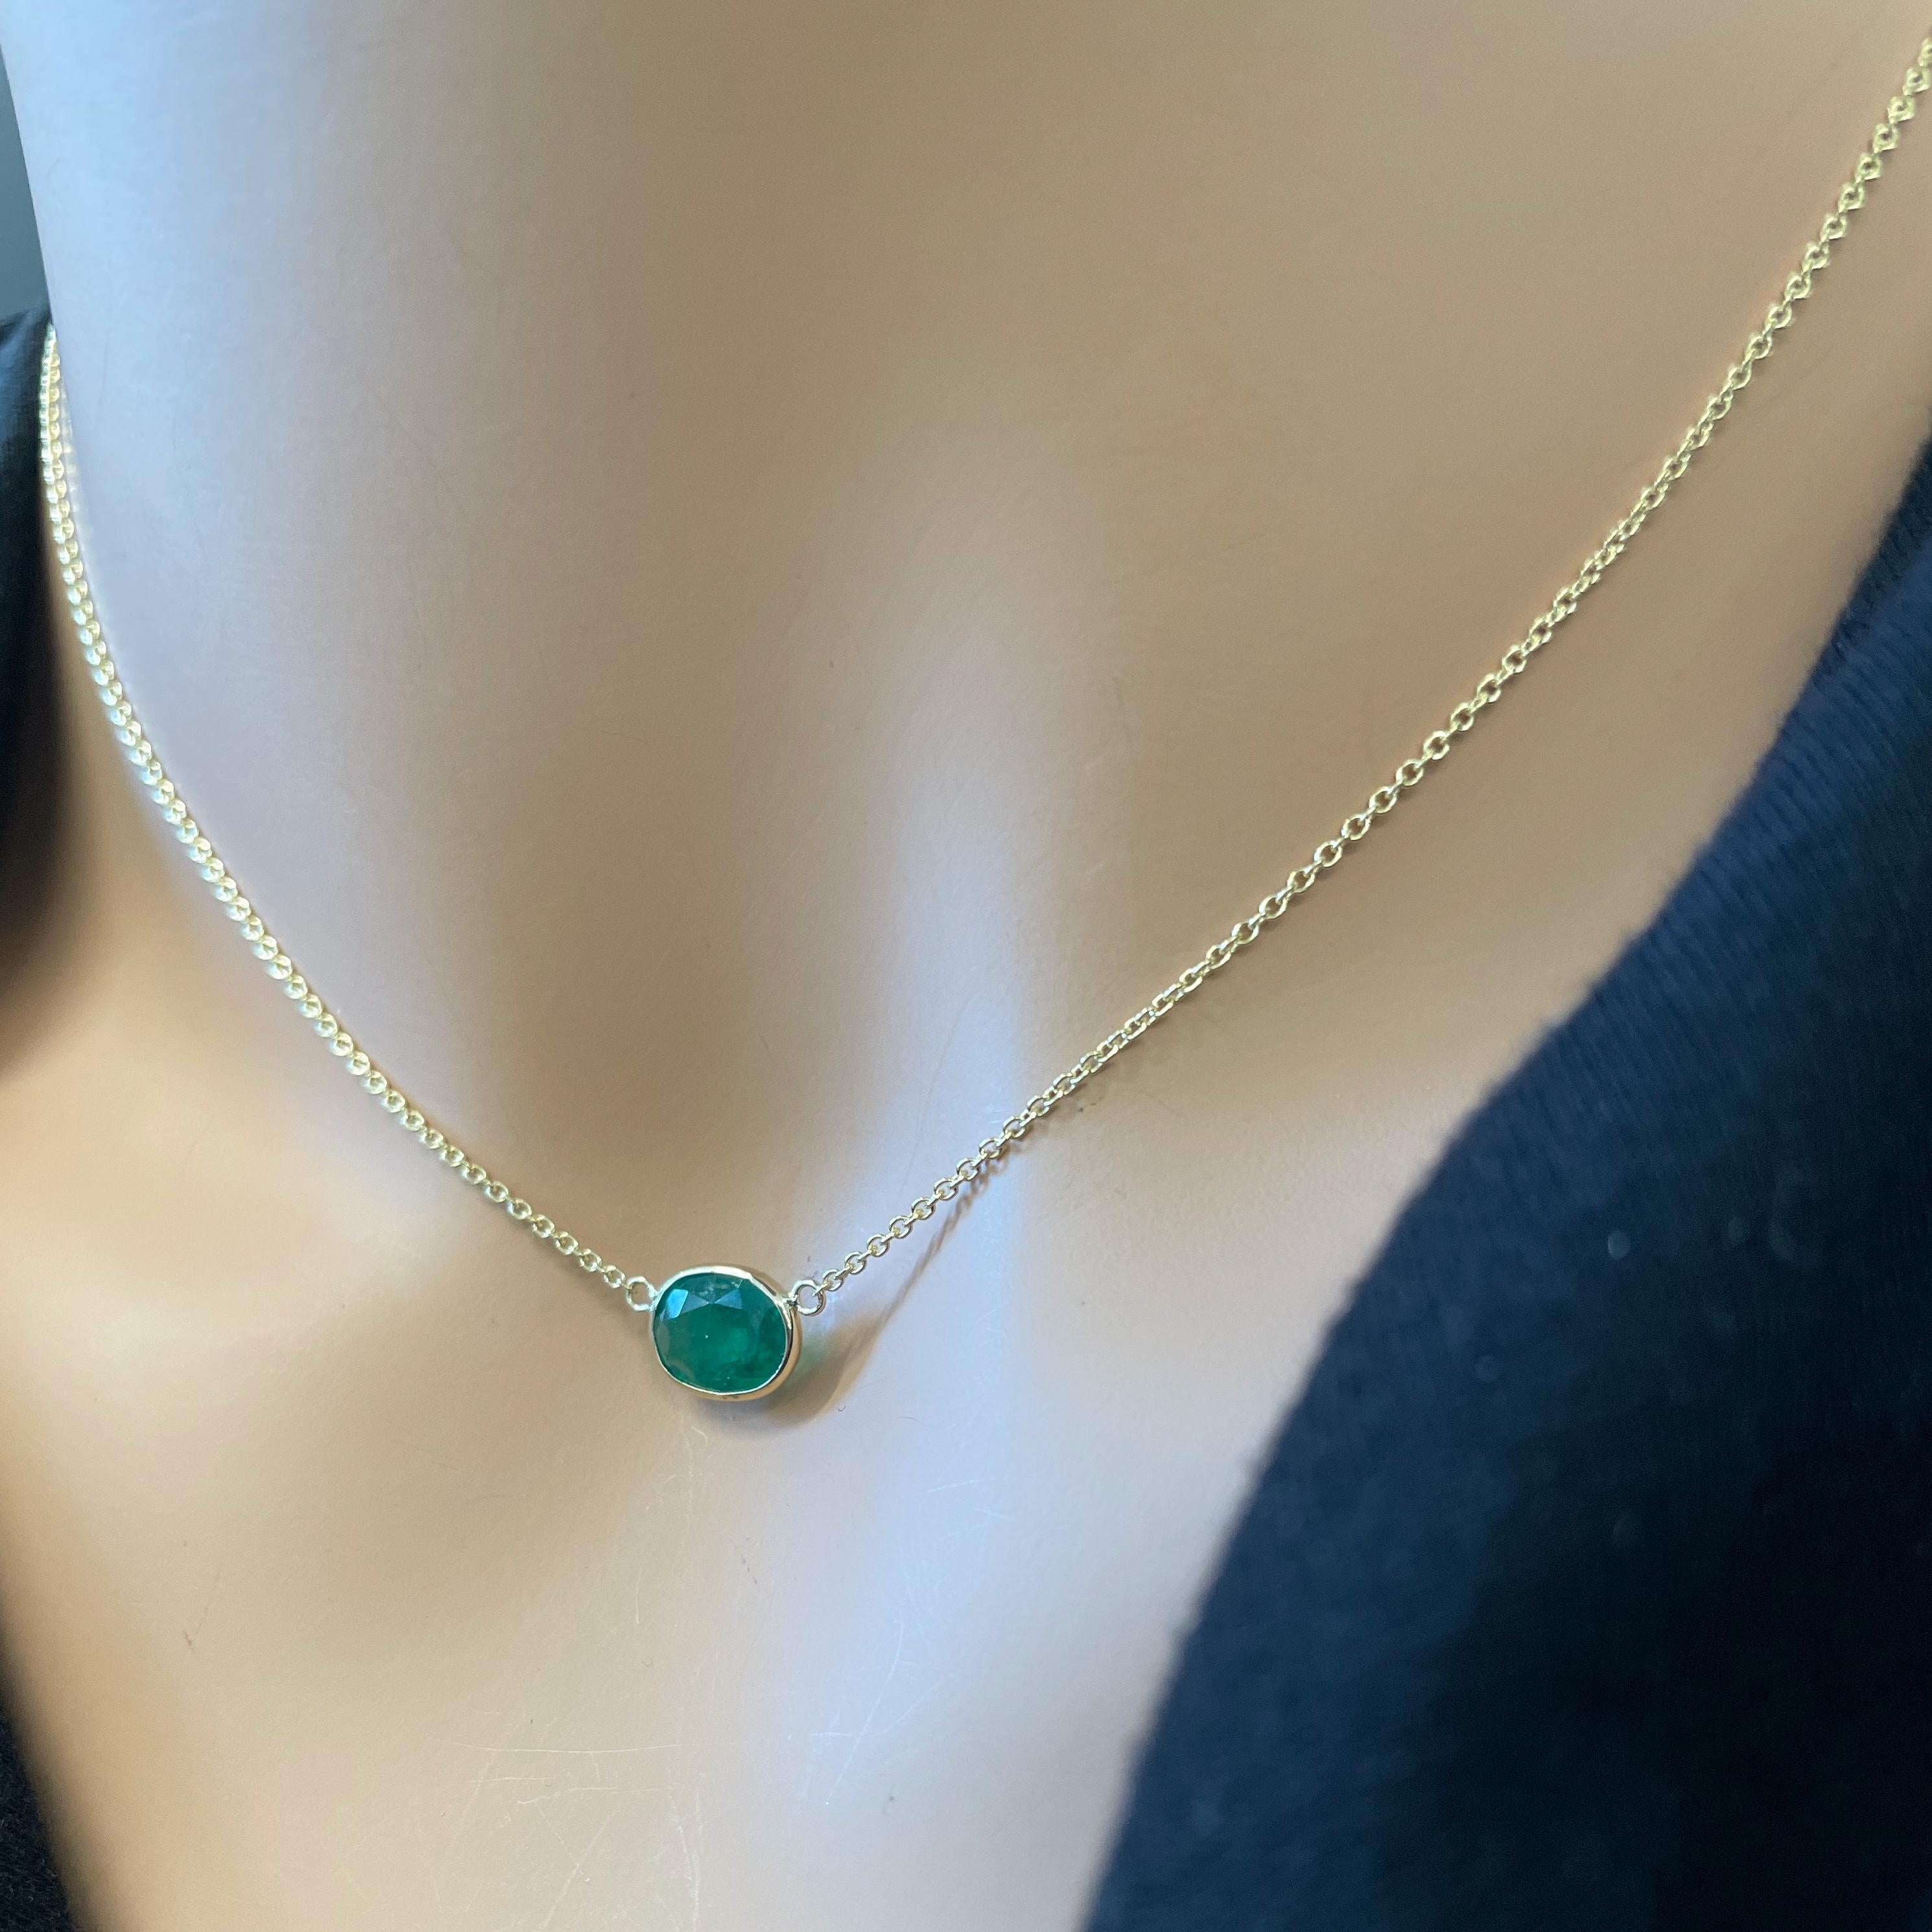 This necklace features an oval-cut green emerald with a weight of 1.64 carats, set in 14k yellow gold (YG). Emeralds are highly valued for their rich green color, and the oval cut is a classic and timeless choice for gemstones, offering an elegant